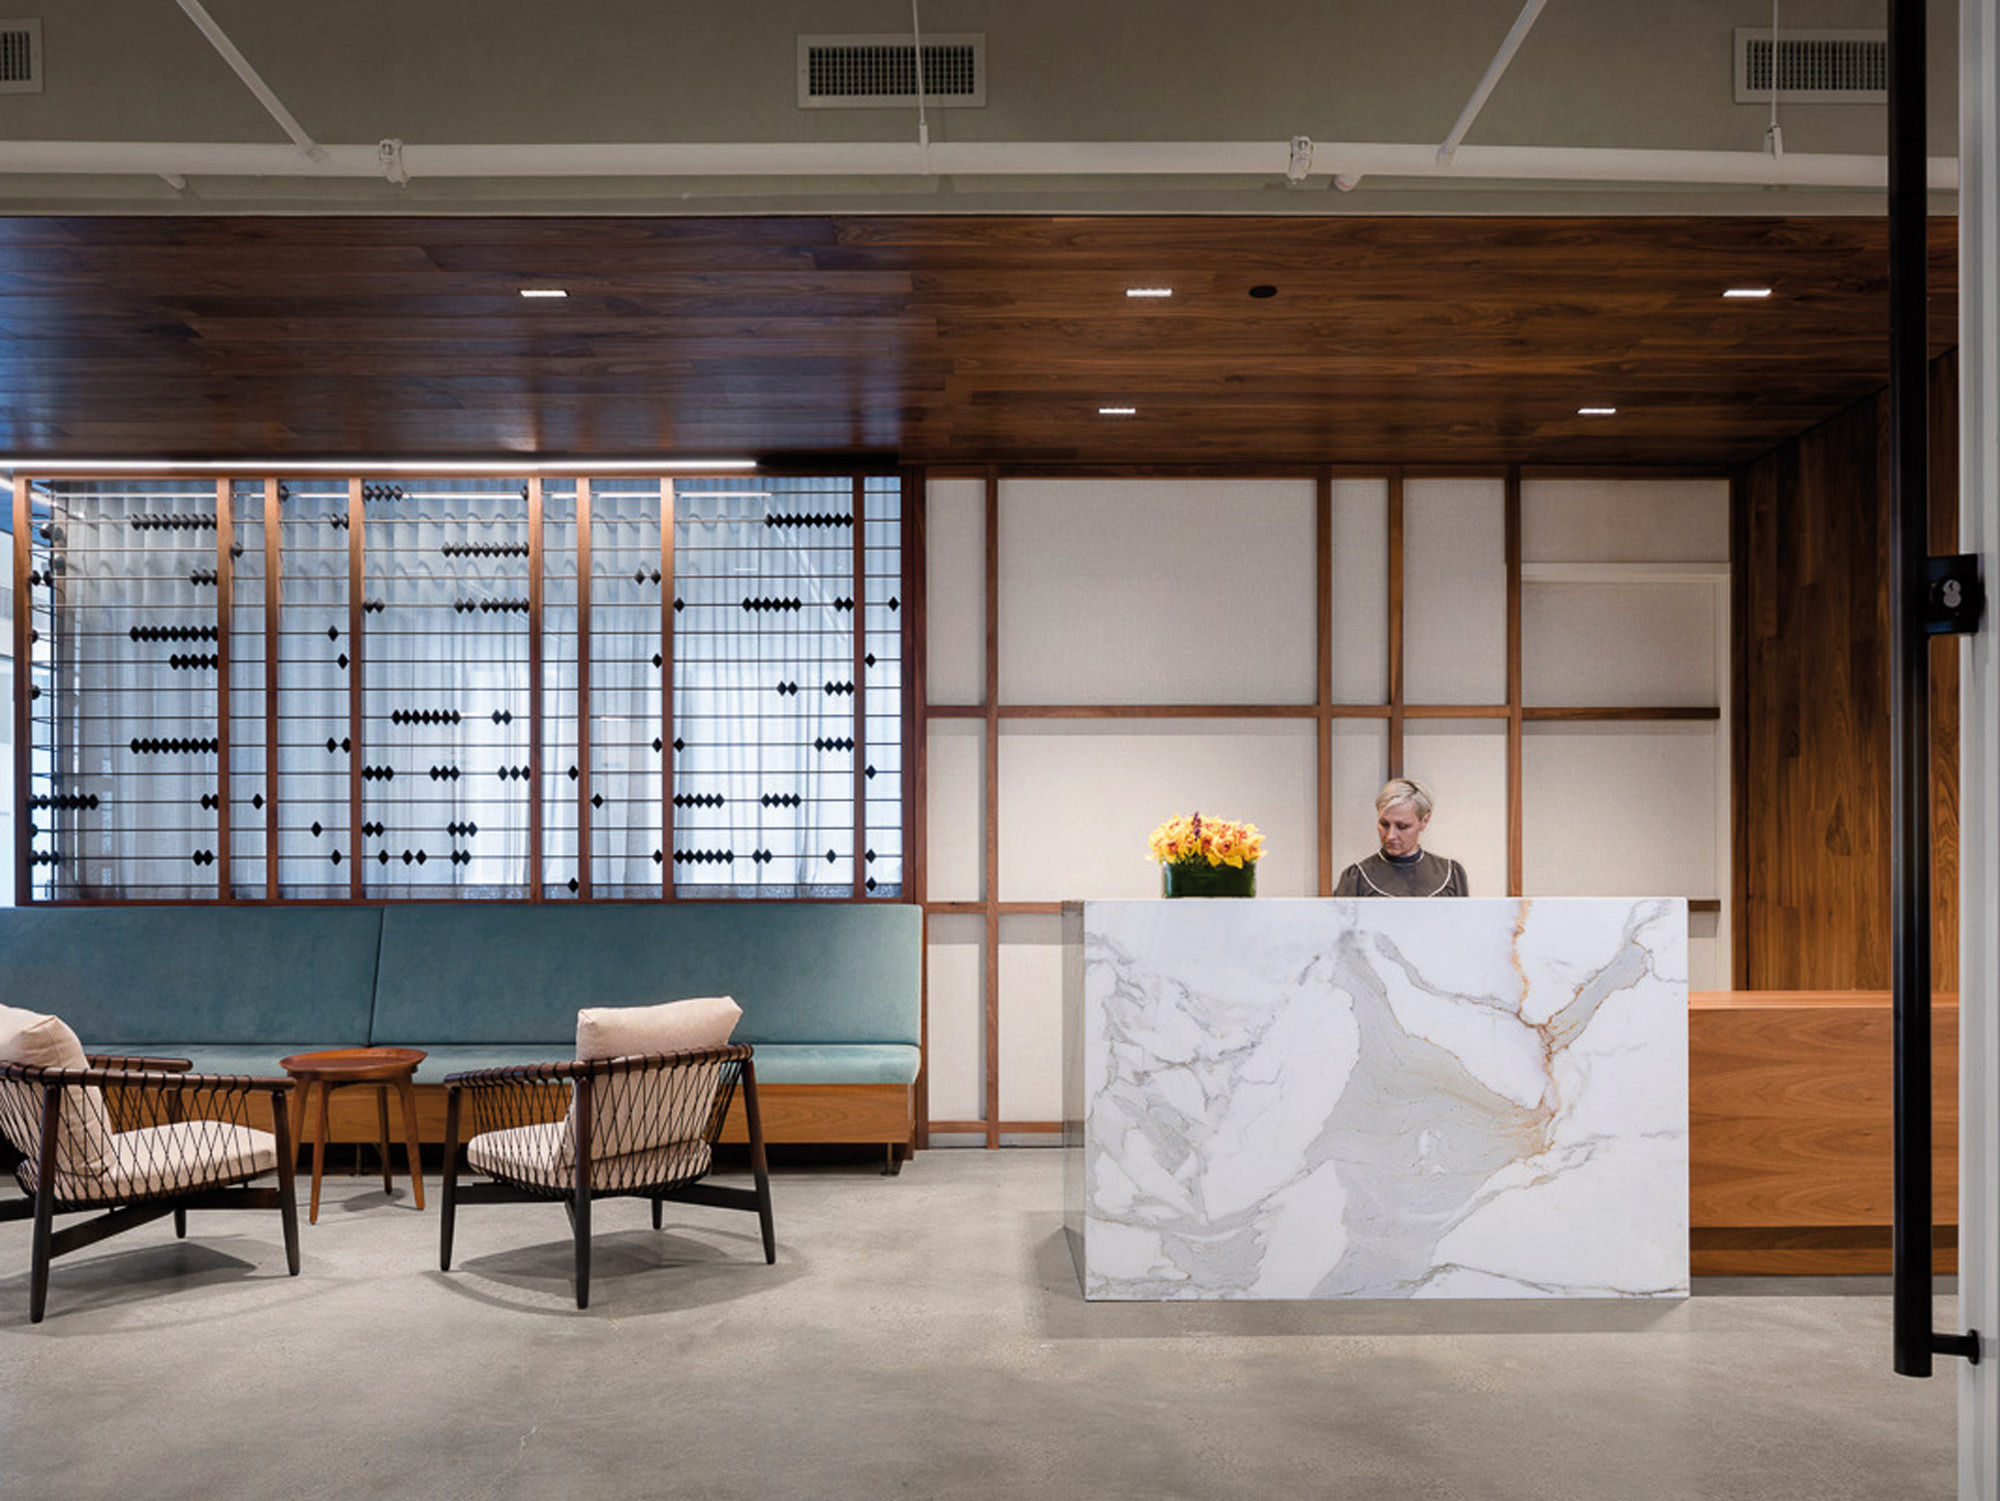 Reception area with minimalist design, featuring a marble-front desk, warm wooden ceiling beams, and tailored upholstered seating. Frosted glass partitions and pendant lighting add to the refined ambiance.